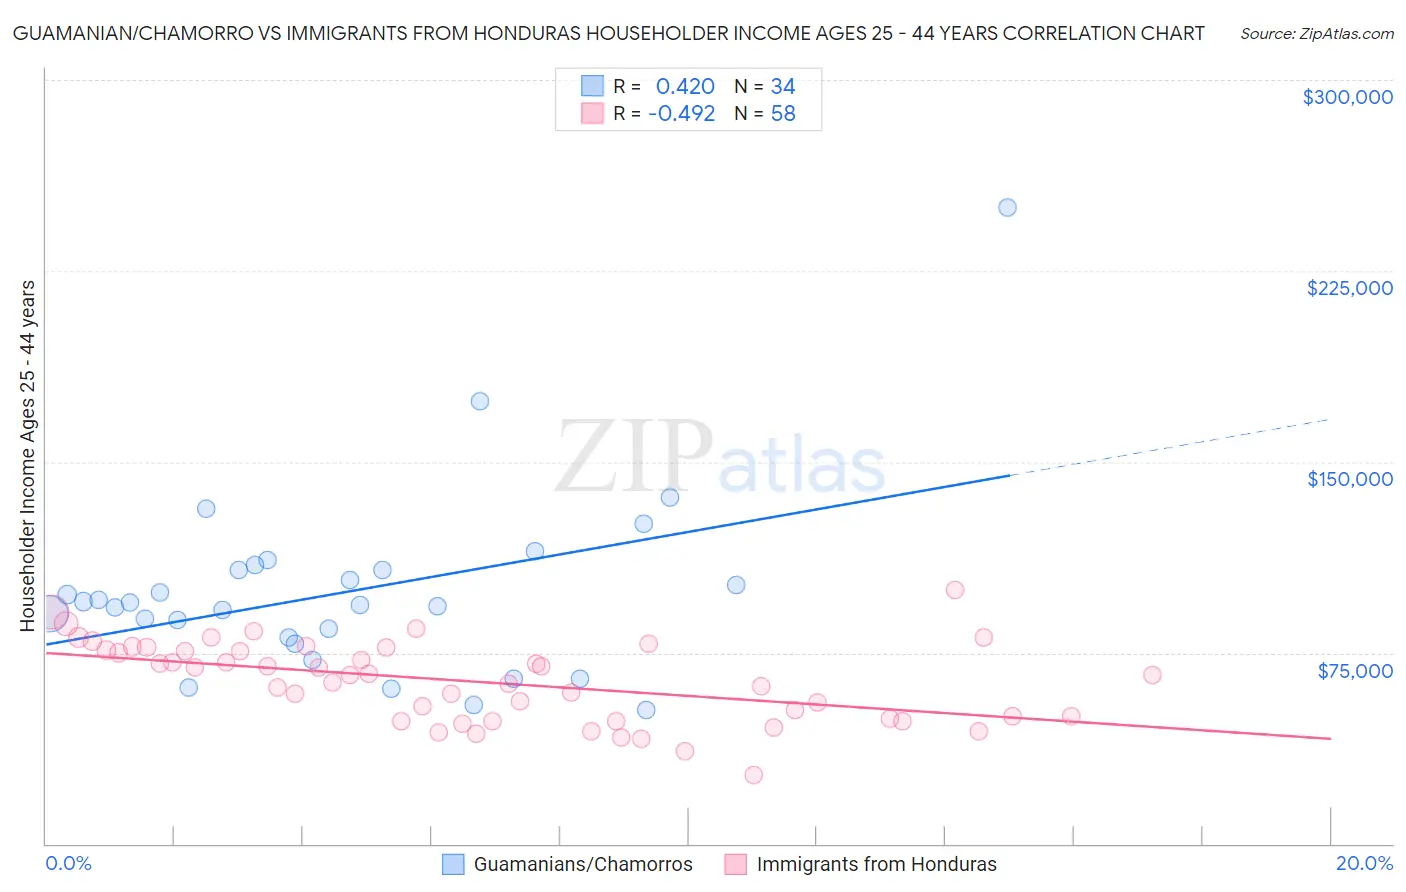 Guamanian/Chamorro vs Immigrants from Honduras Householder Income Ages 25 - 44 years